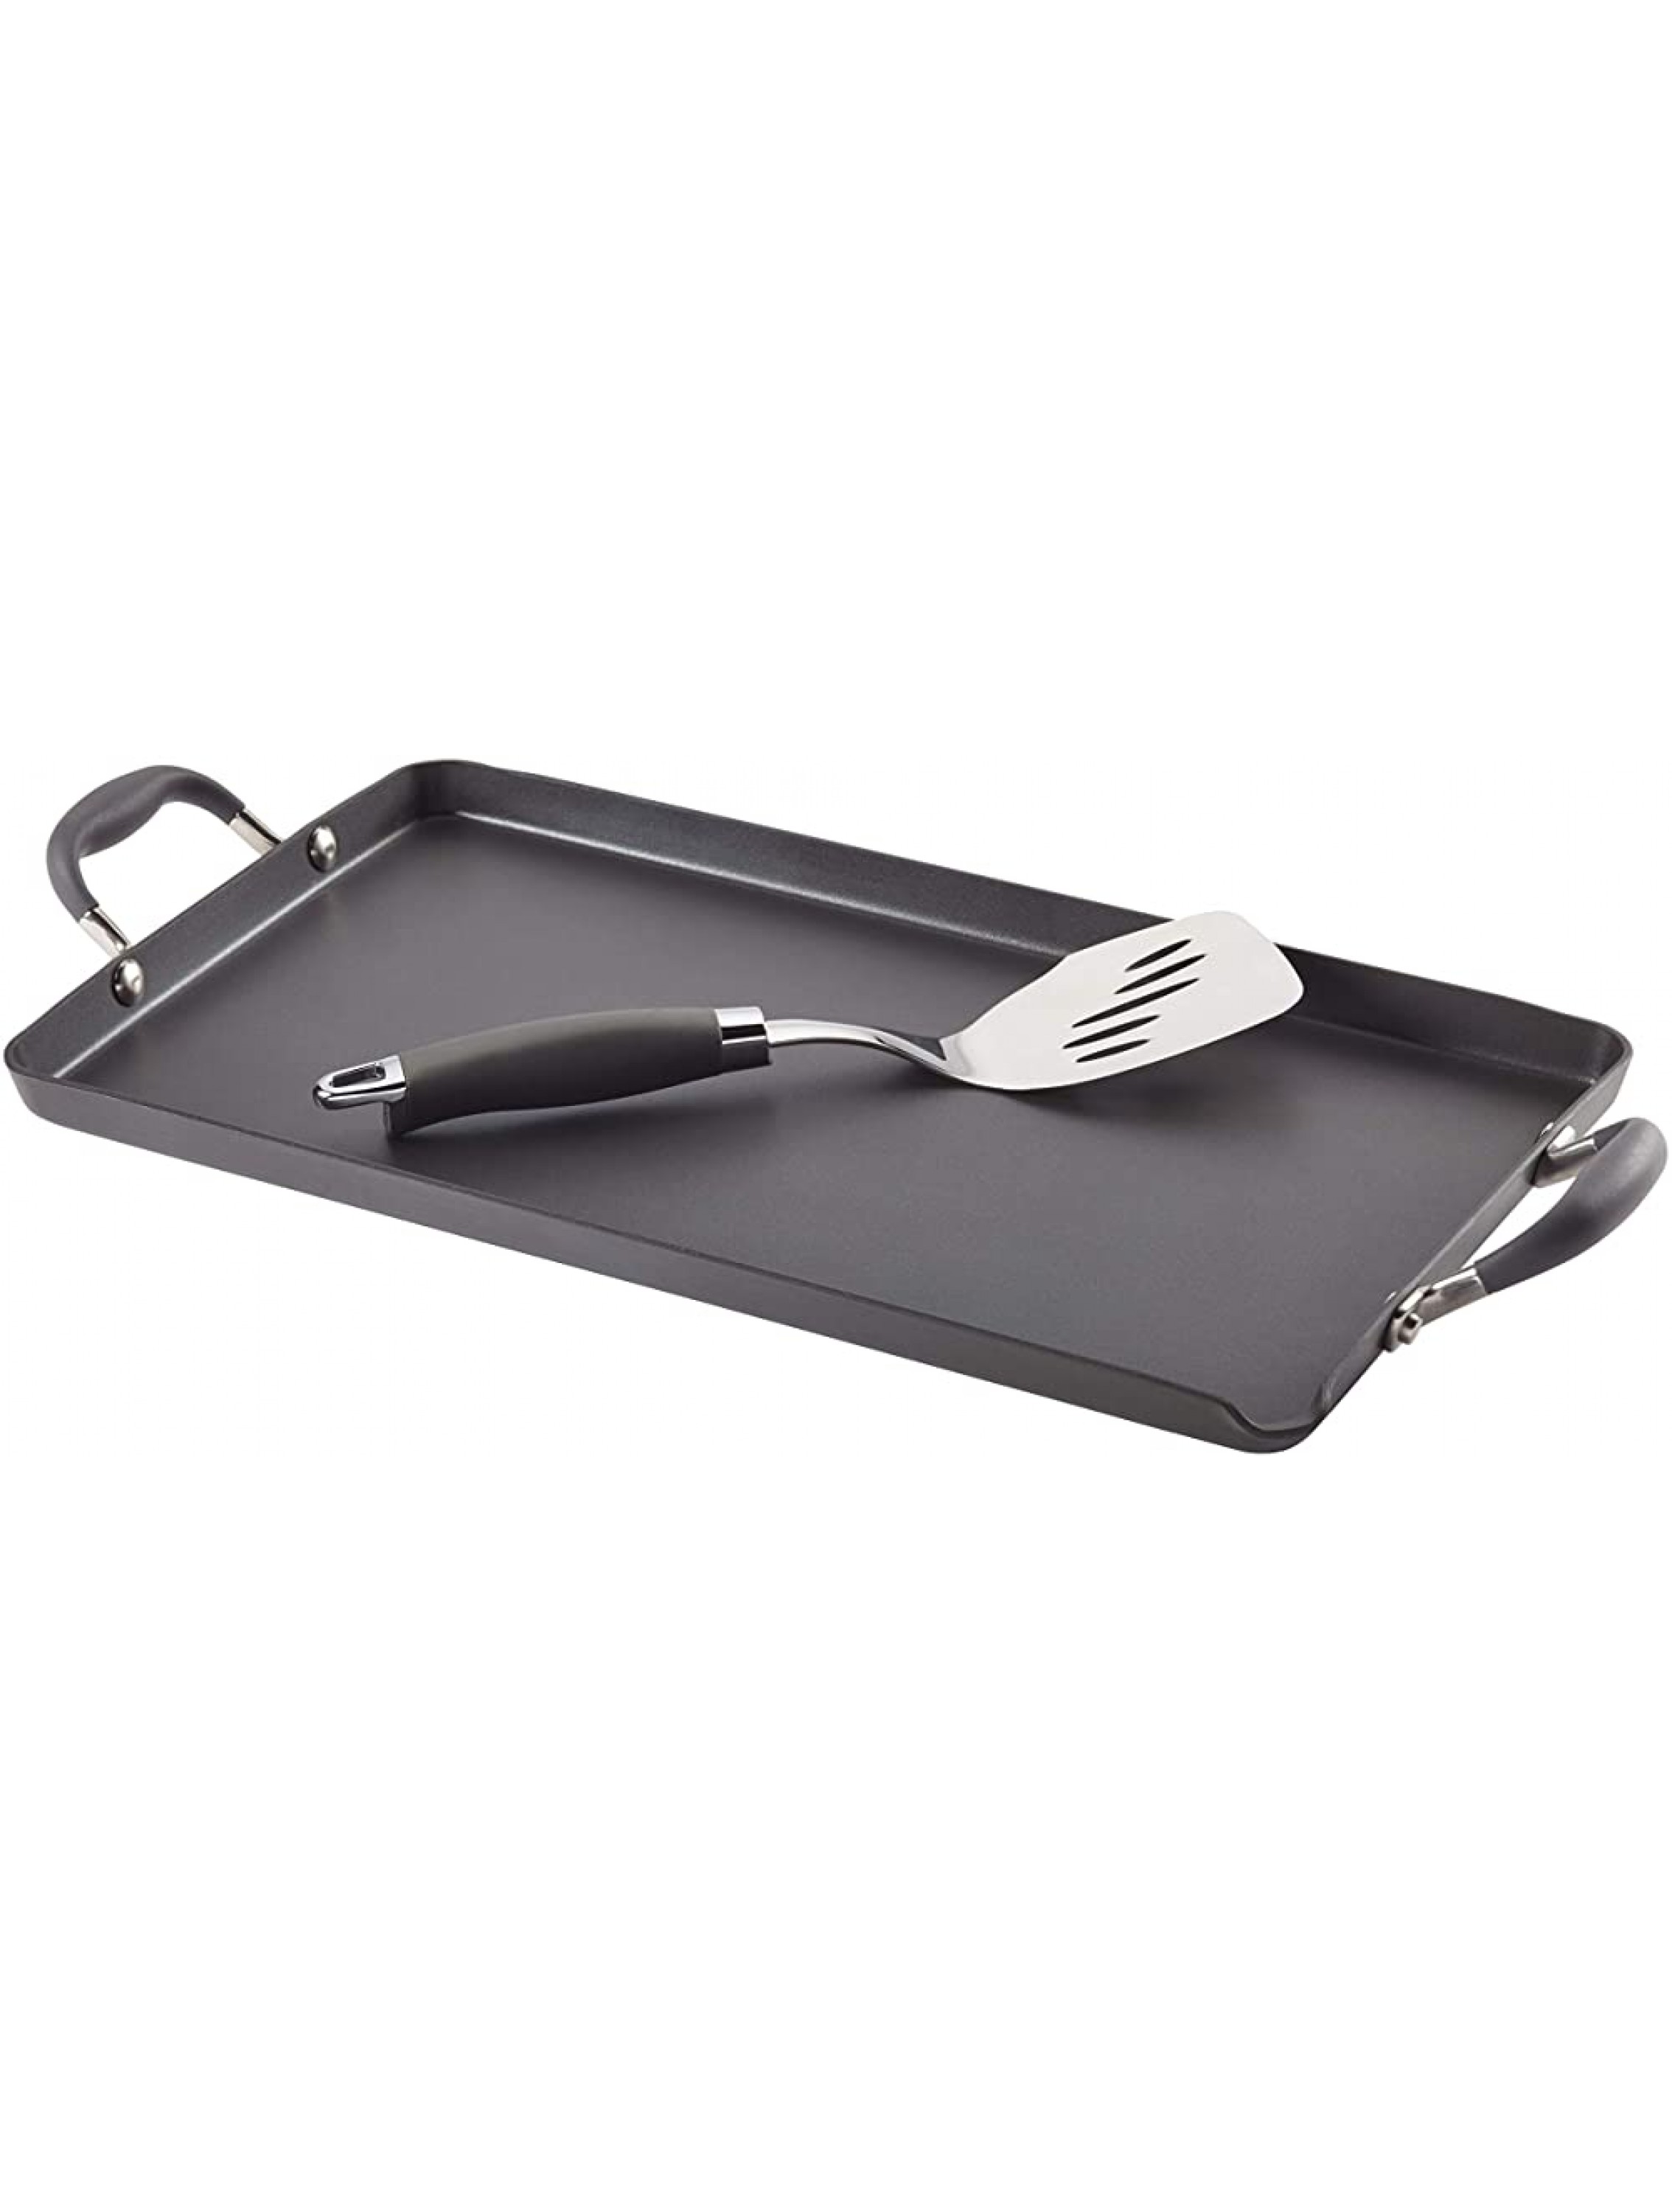 Anolon Advanced Hard Anodized Nonstick Griddle Pan Flat Grill 18 Inch x 10 Inch Gray - BPVT26NVD